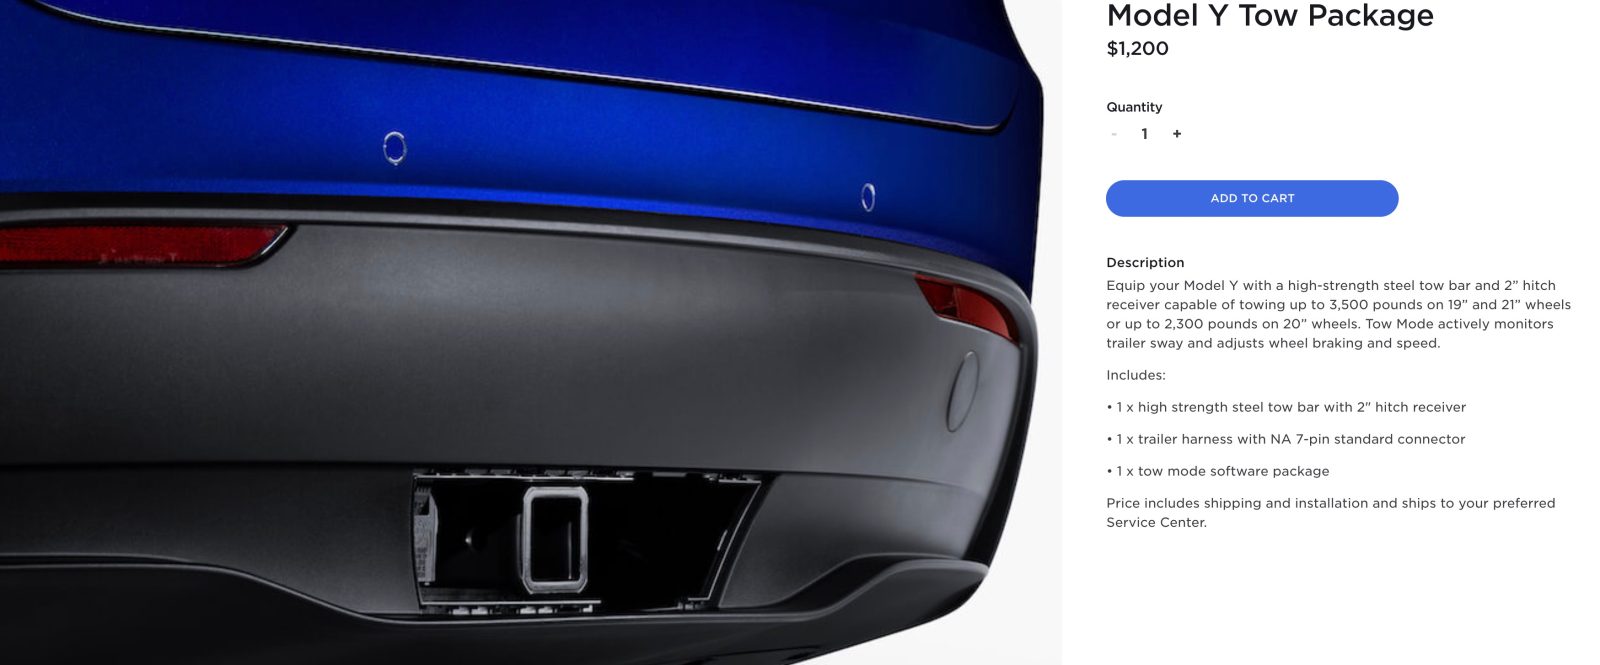 Tesla launches Model Y tow package, reveals strange detail about